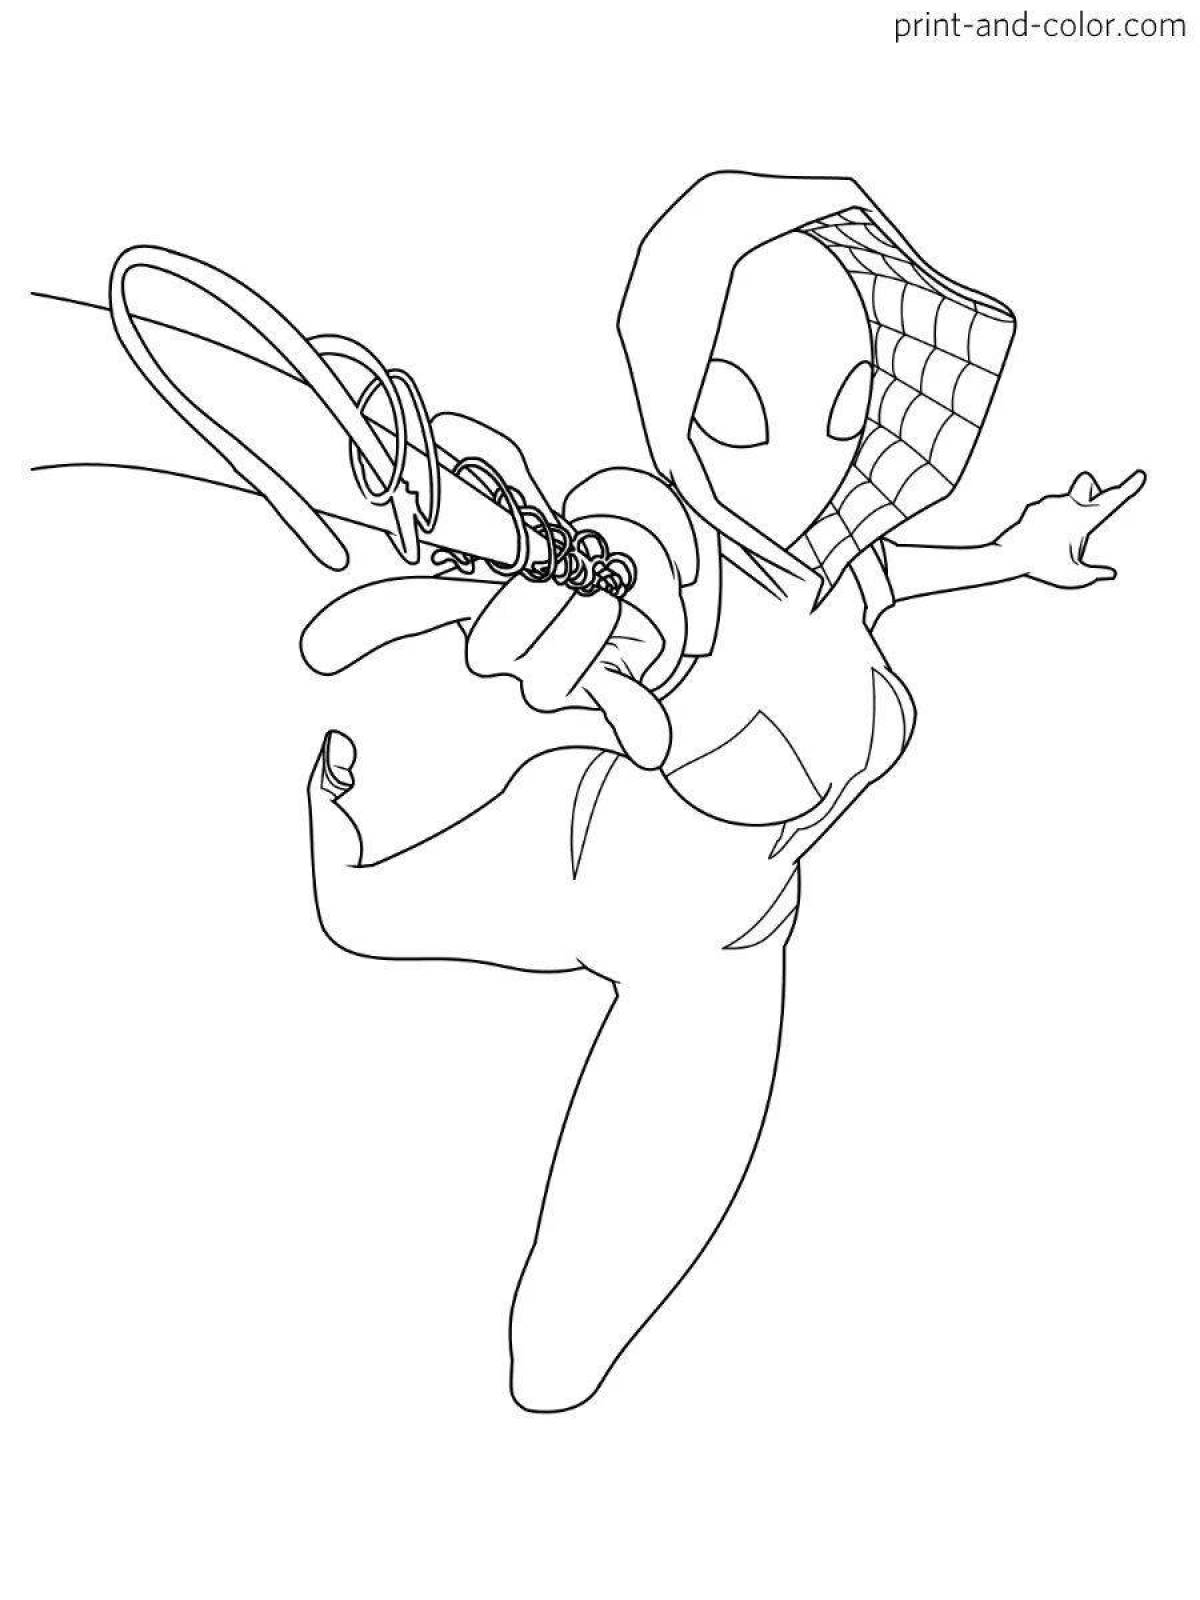 Spiderman's charming girl coloring page